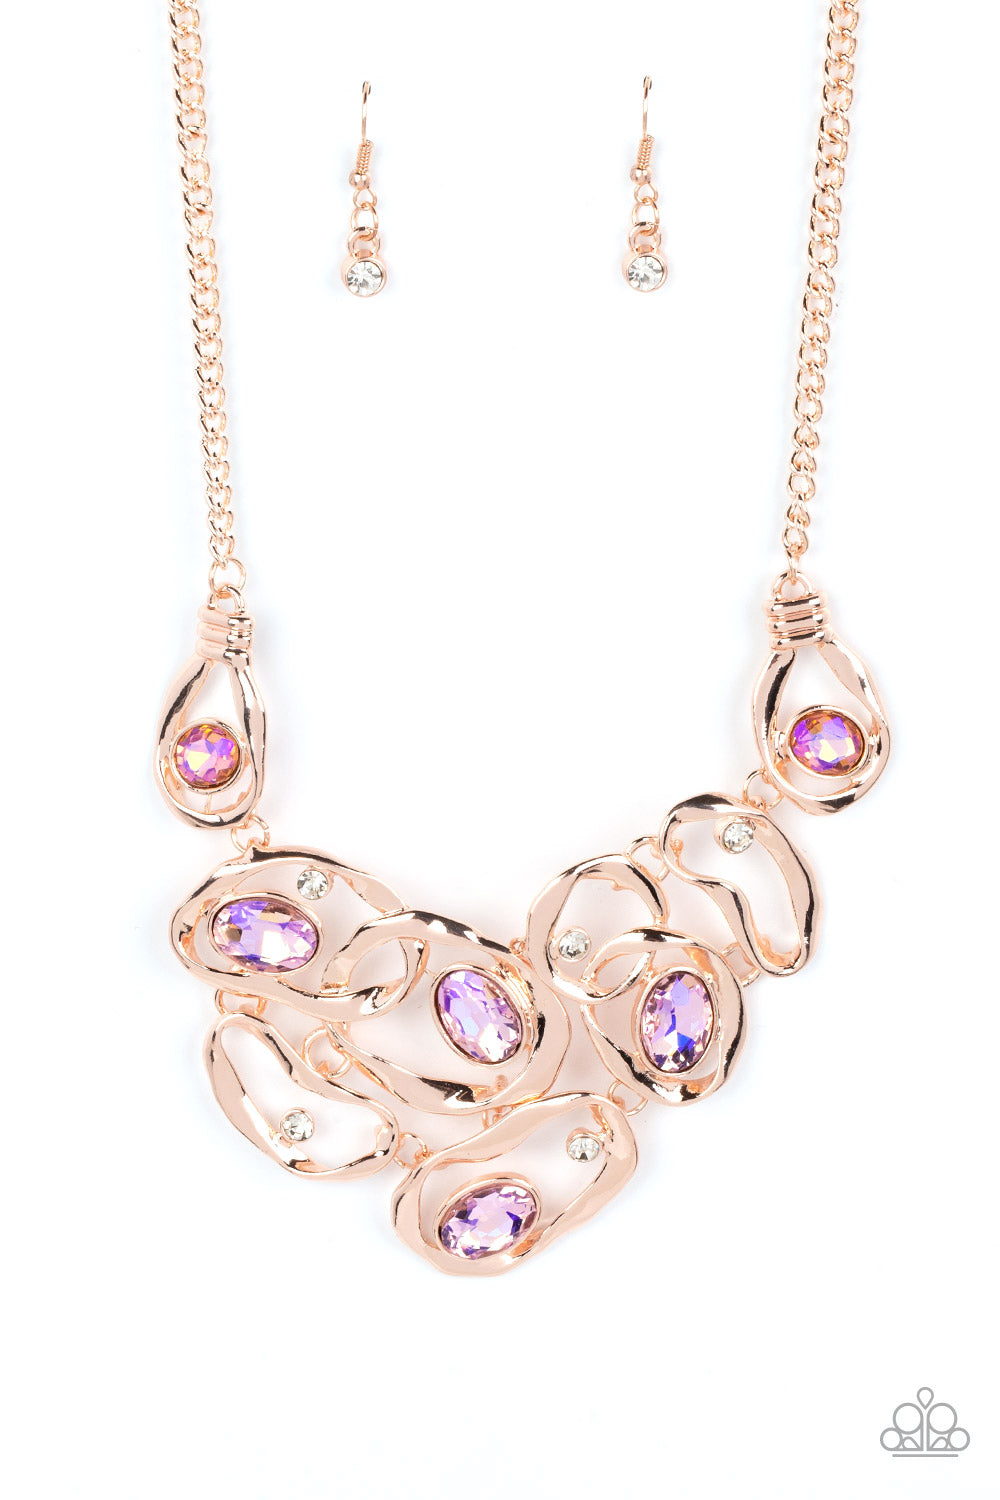 Warp Speed - Rose Gold Necklace - A Finishing Touch Jewelry